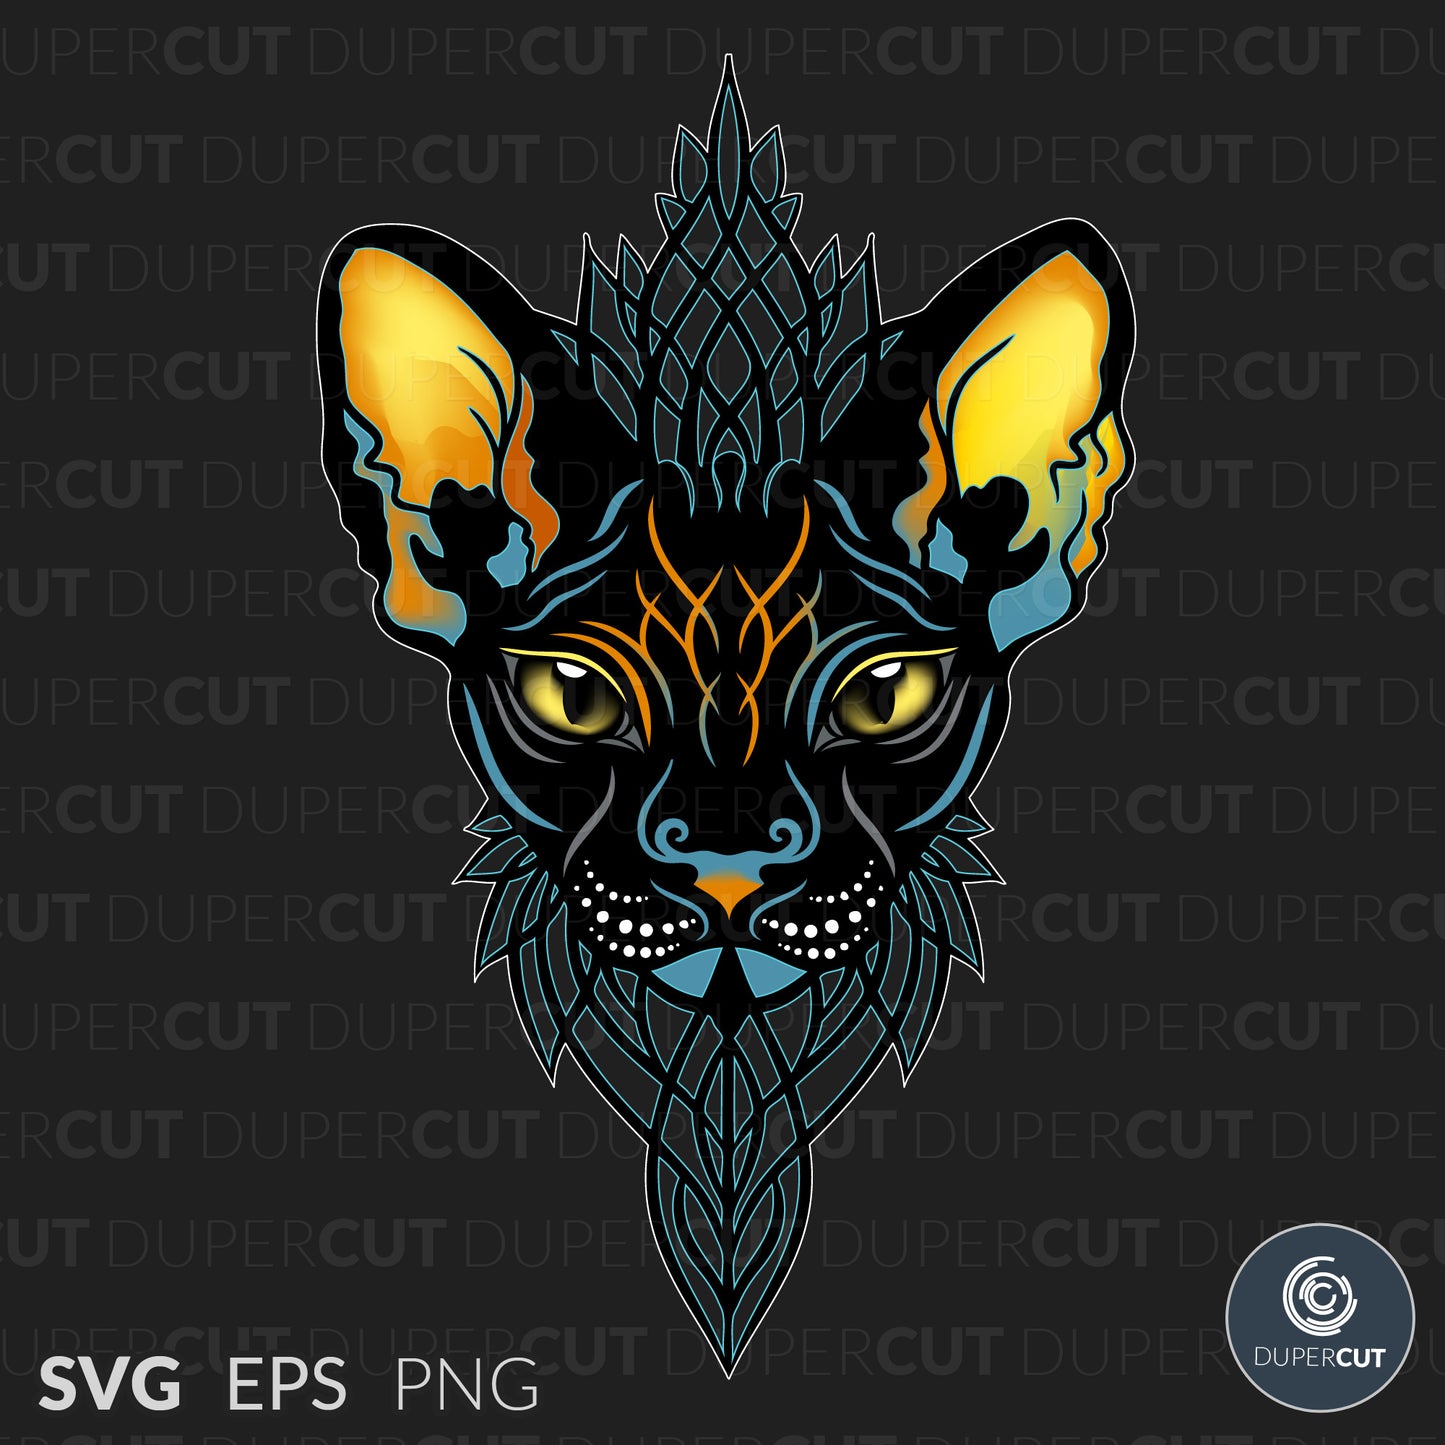 Sphynx Cat Orange Blue - EPS, SVG, PNG files. Vector Colour illustration for print on demand, sublimation, custom t-shirts, hoodies, tumblers.